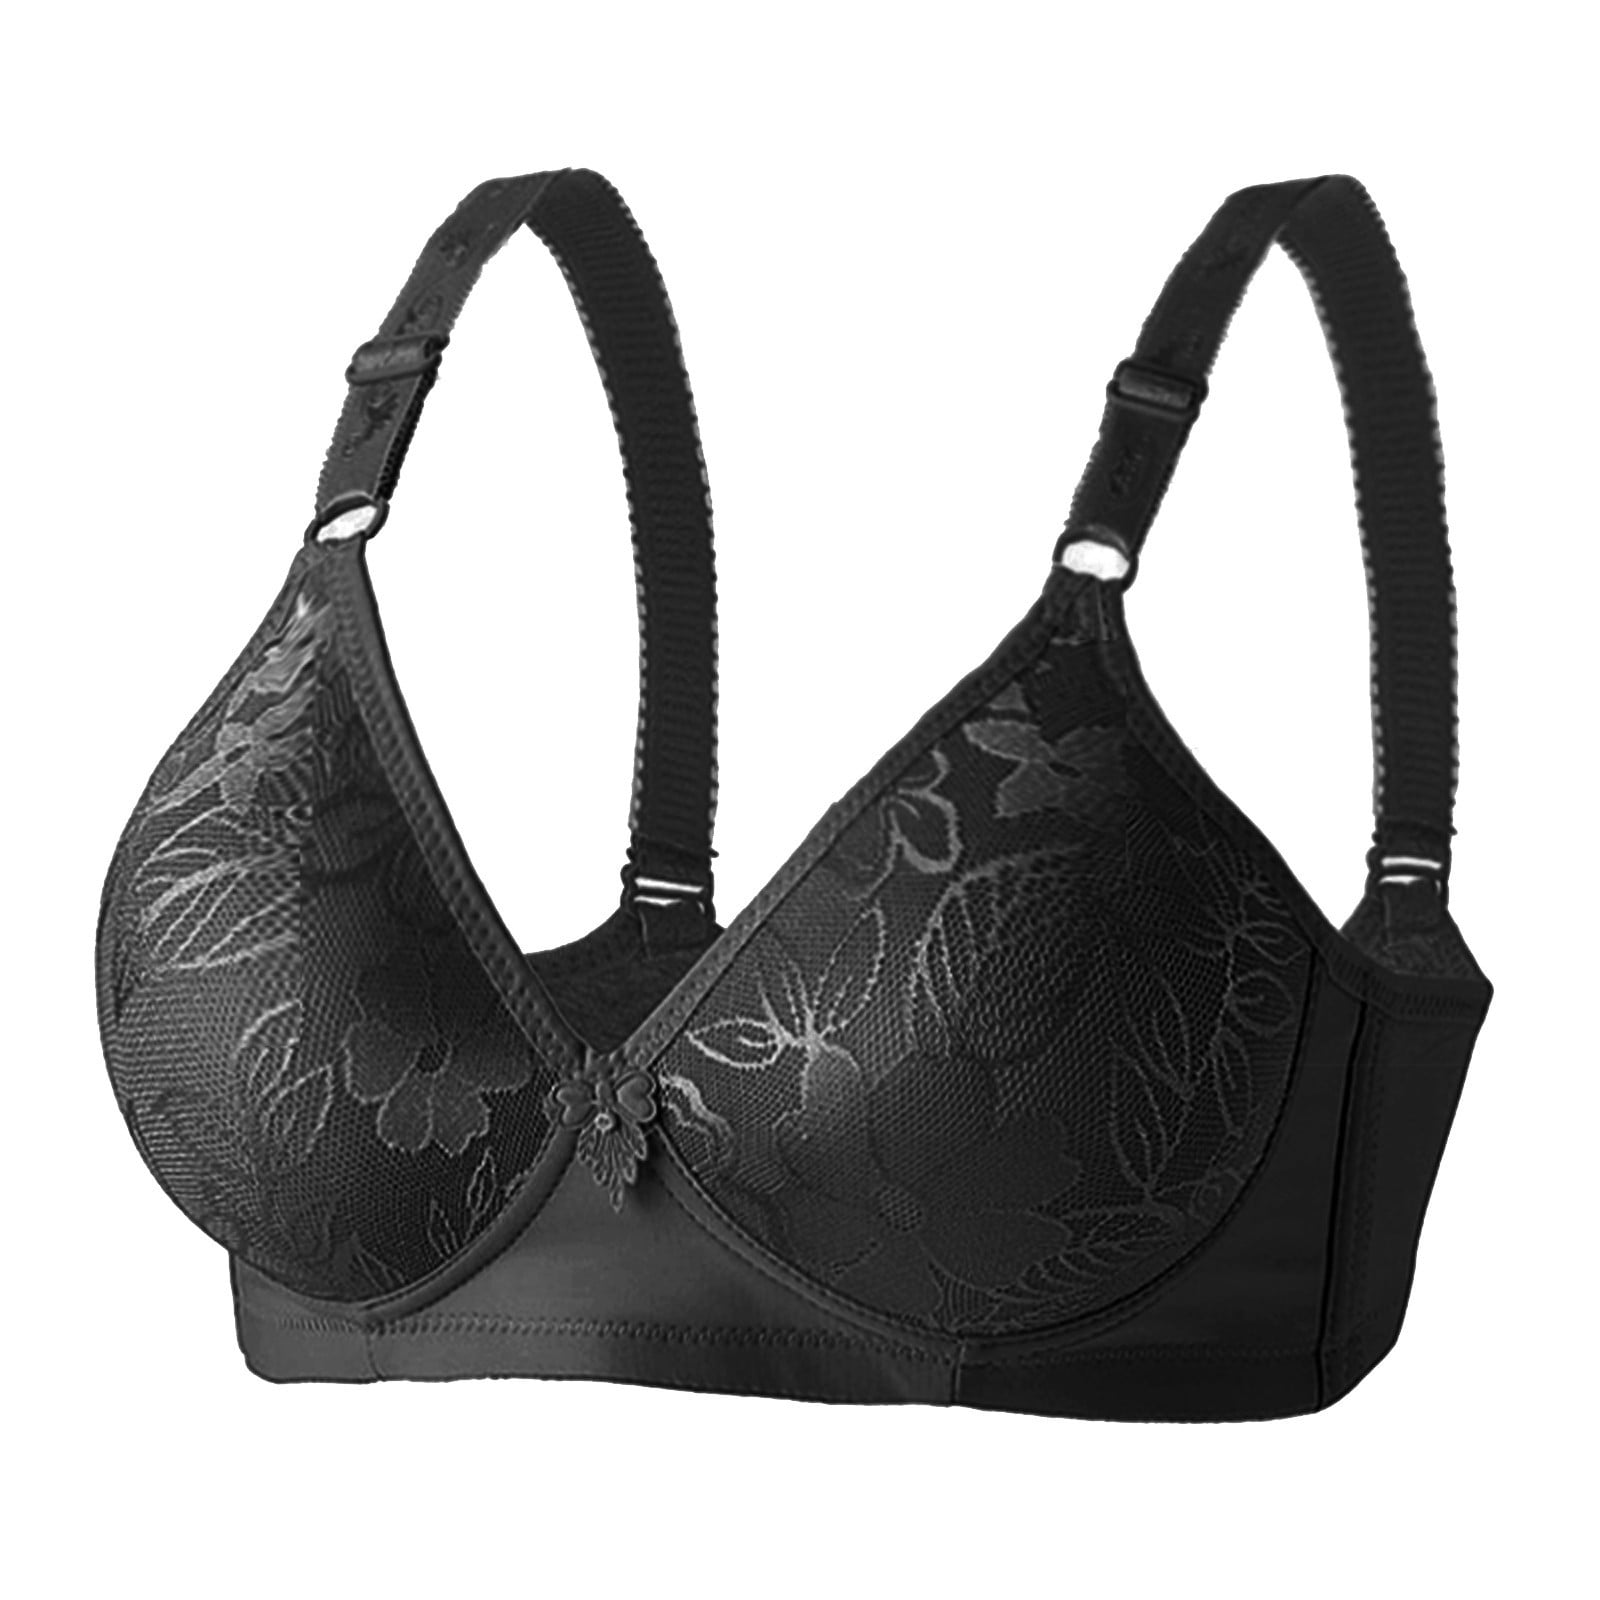 Ifg Ladies Classic Cotton Bra - Black Color Price in Pakistan - View Latest  Collection of Bras